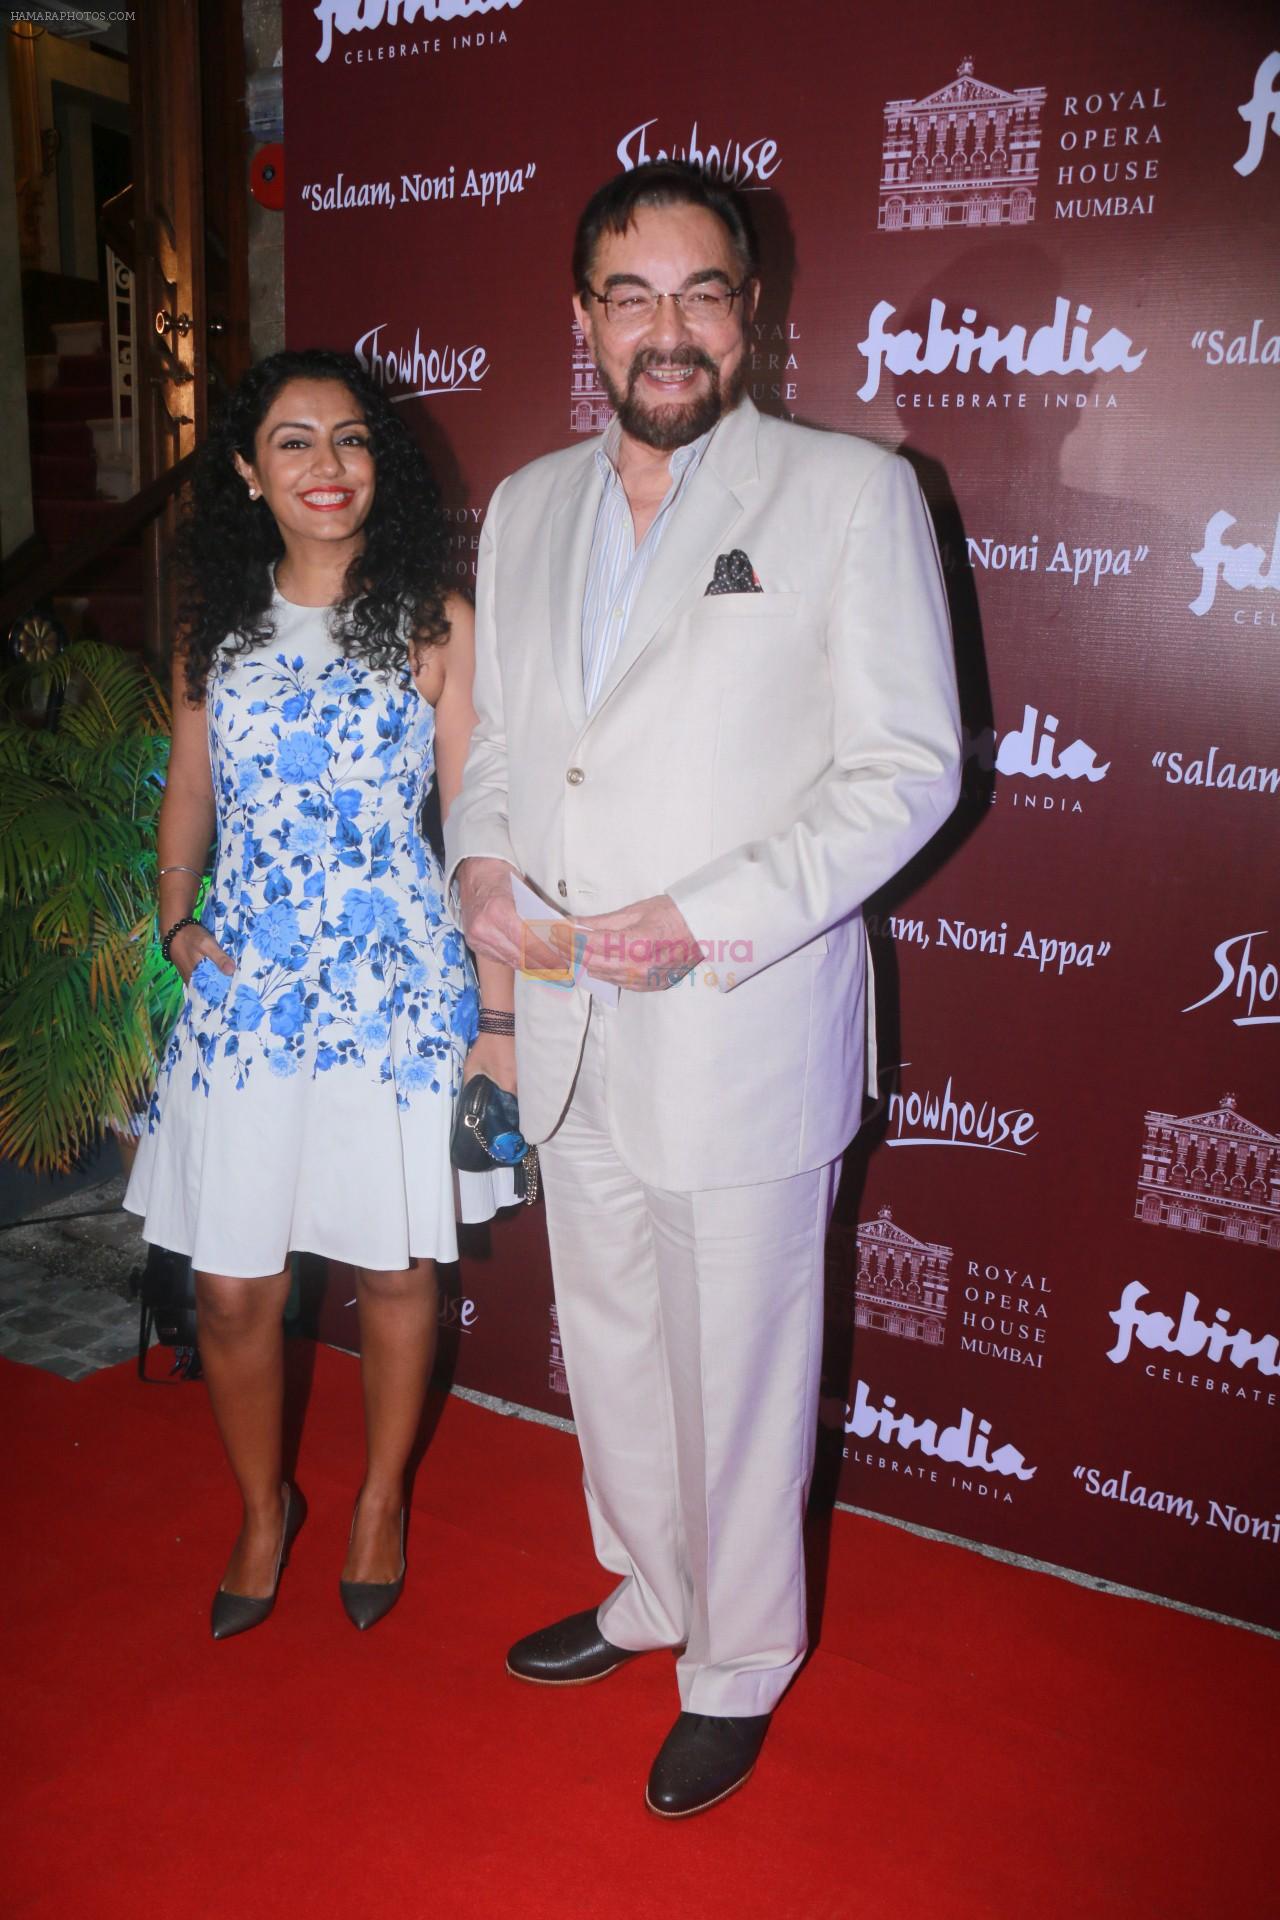 Kabir Bedi, Parveen Dusanj at the Special preview of Salaam Noni Appa based on Twinkle Khanna's novel at Royal Opera House in mumbai on 28th Oct 2017